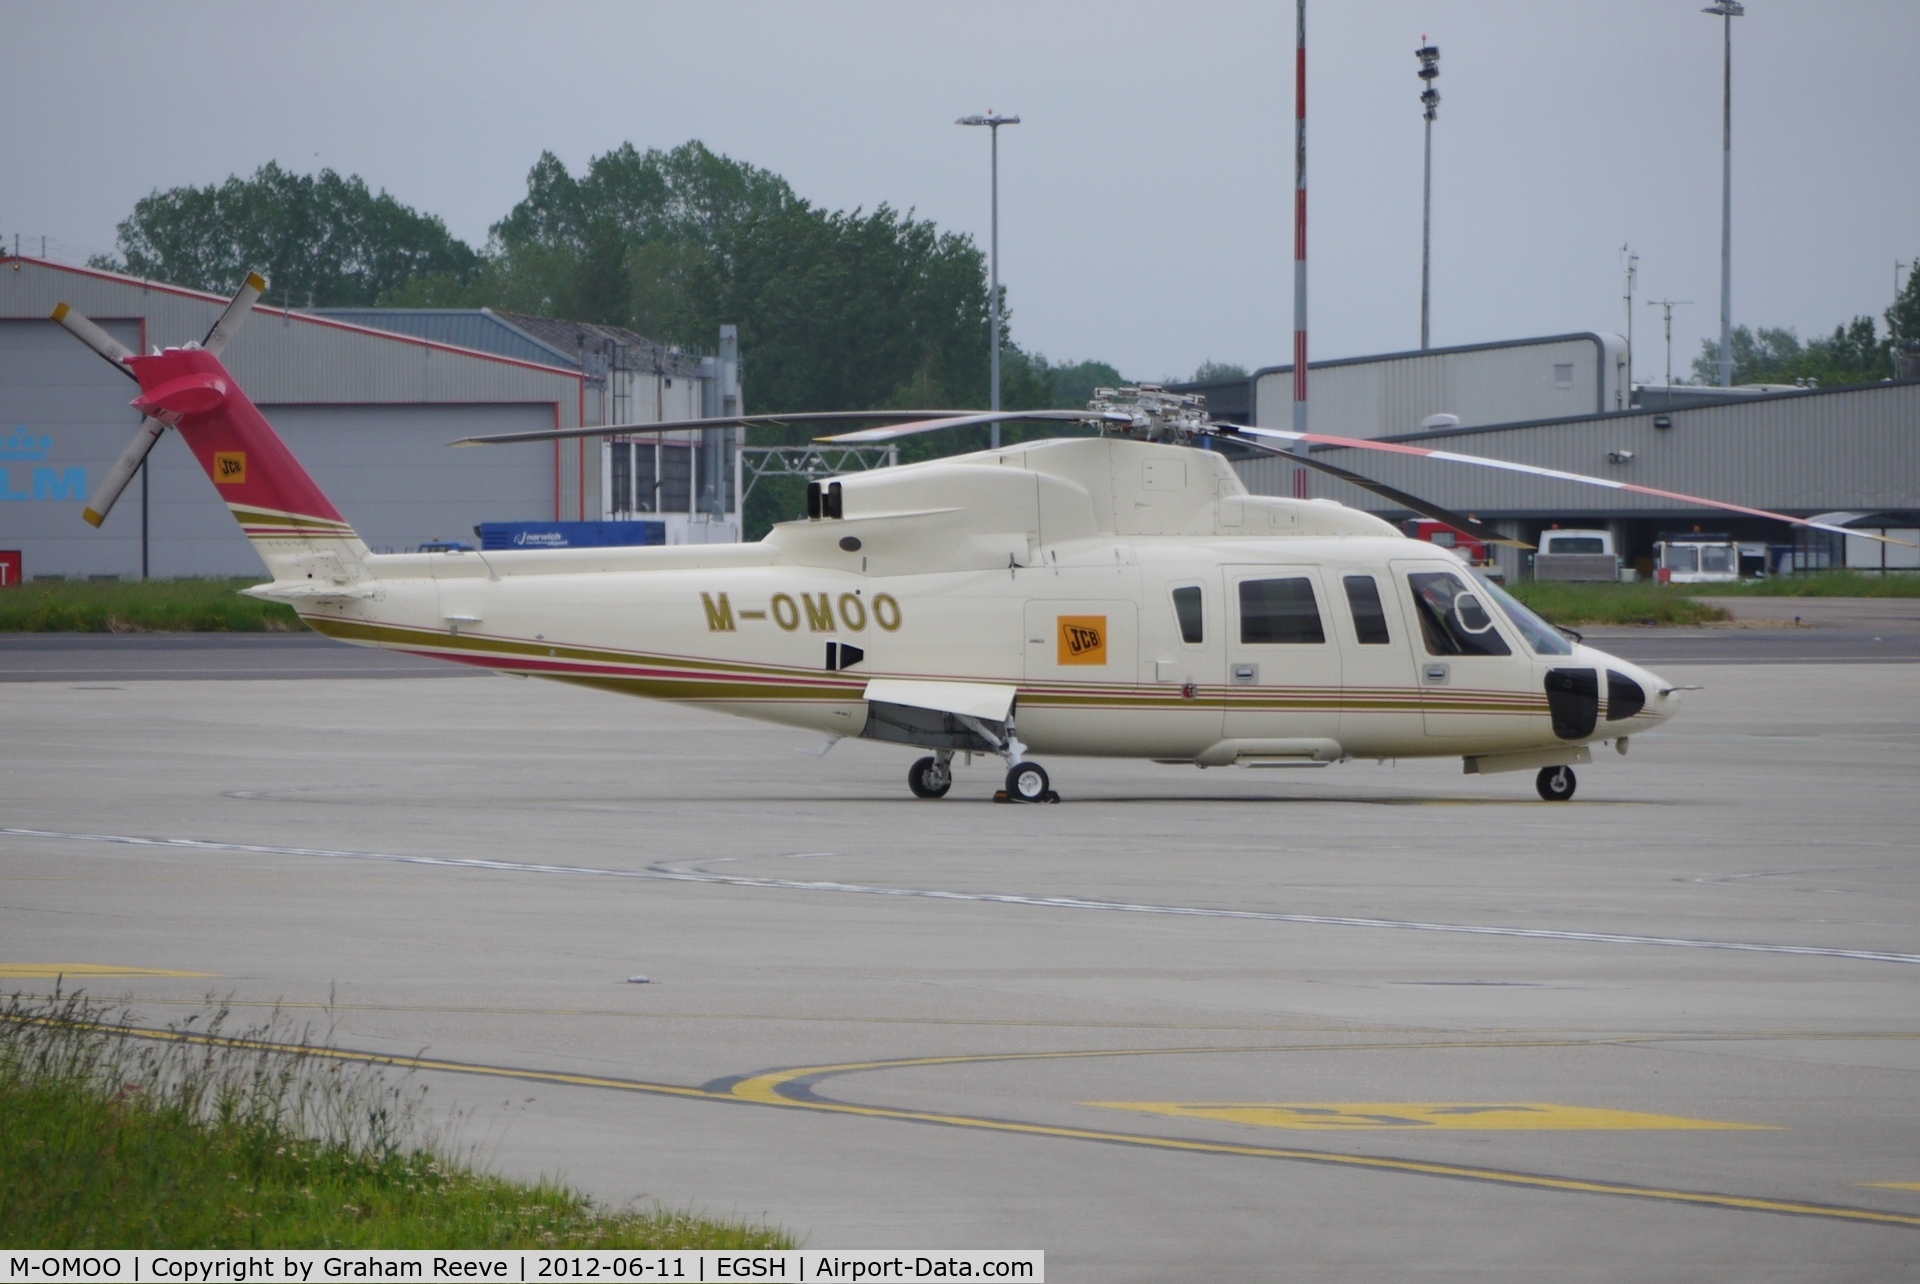 M-OMOO, 2011 Sikorsky S-76C C/N 760807, Parked at Norwich.